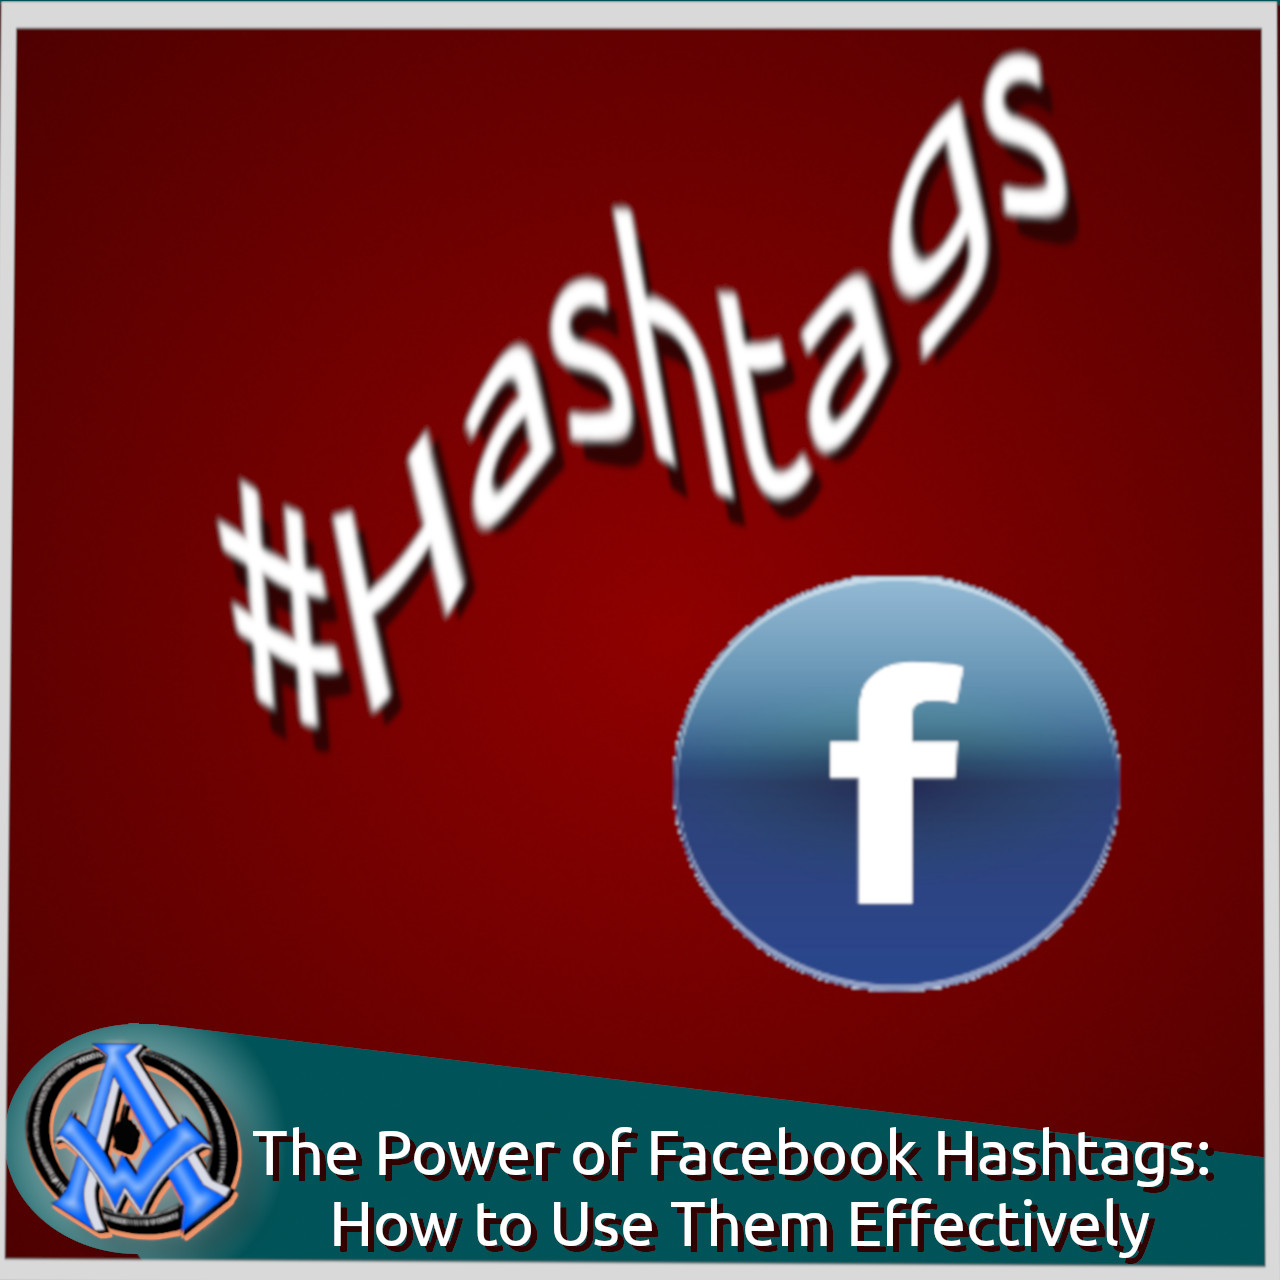 The Power of Facebook Hashtags: How to Use Them Effectively